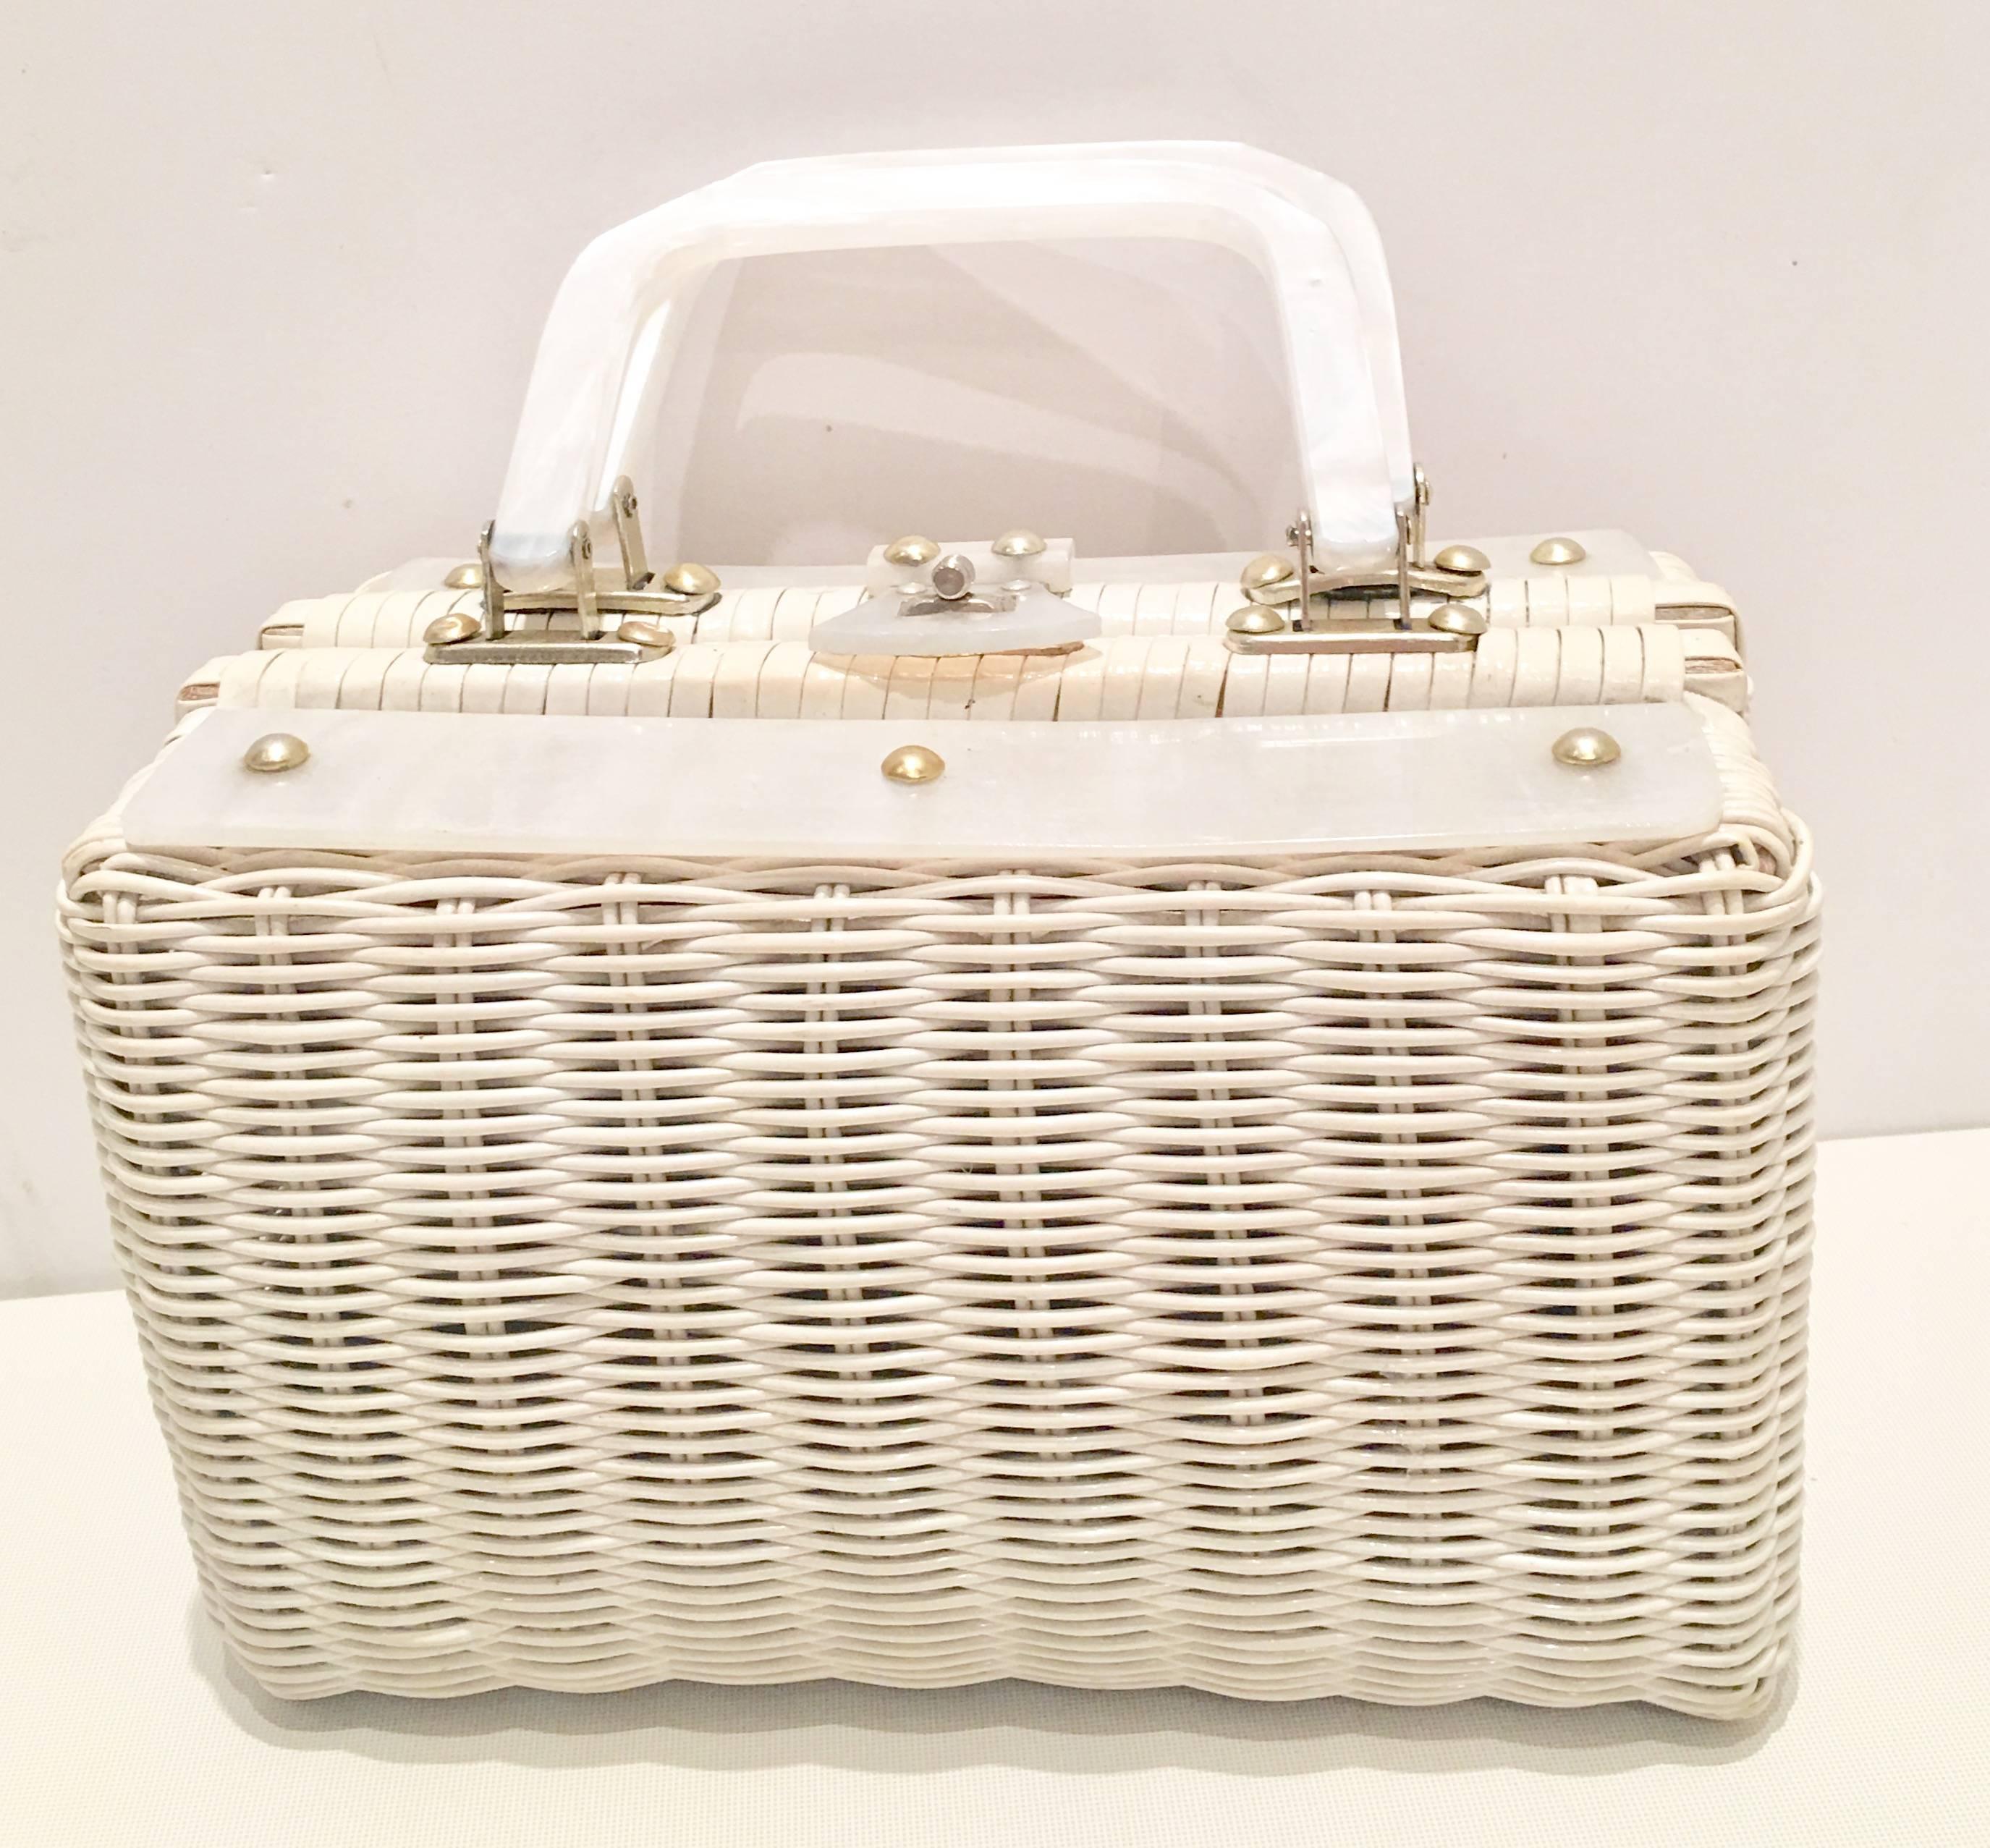 Vintage white woven and Lucite with brass hardware box style handbag. Lucite is white mother-of-pearl finish. Interior is lined with a storage pocket and has the original manufacturer tag that reads, Hong Kong. Lucite handles have a 4" inch